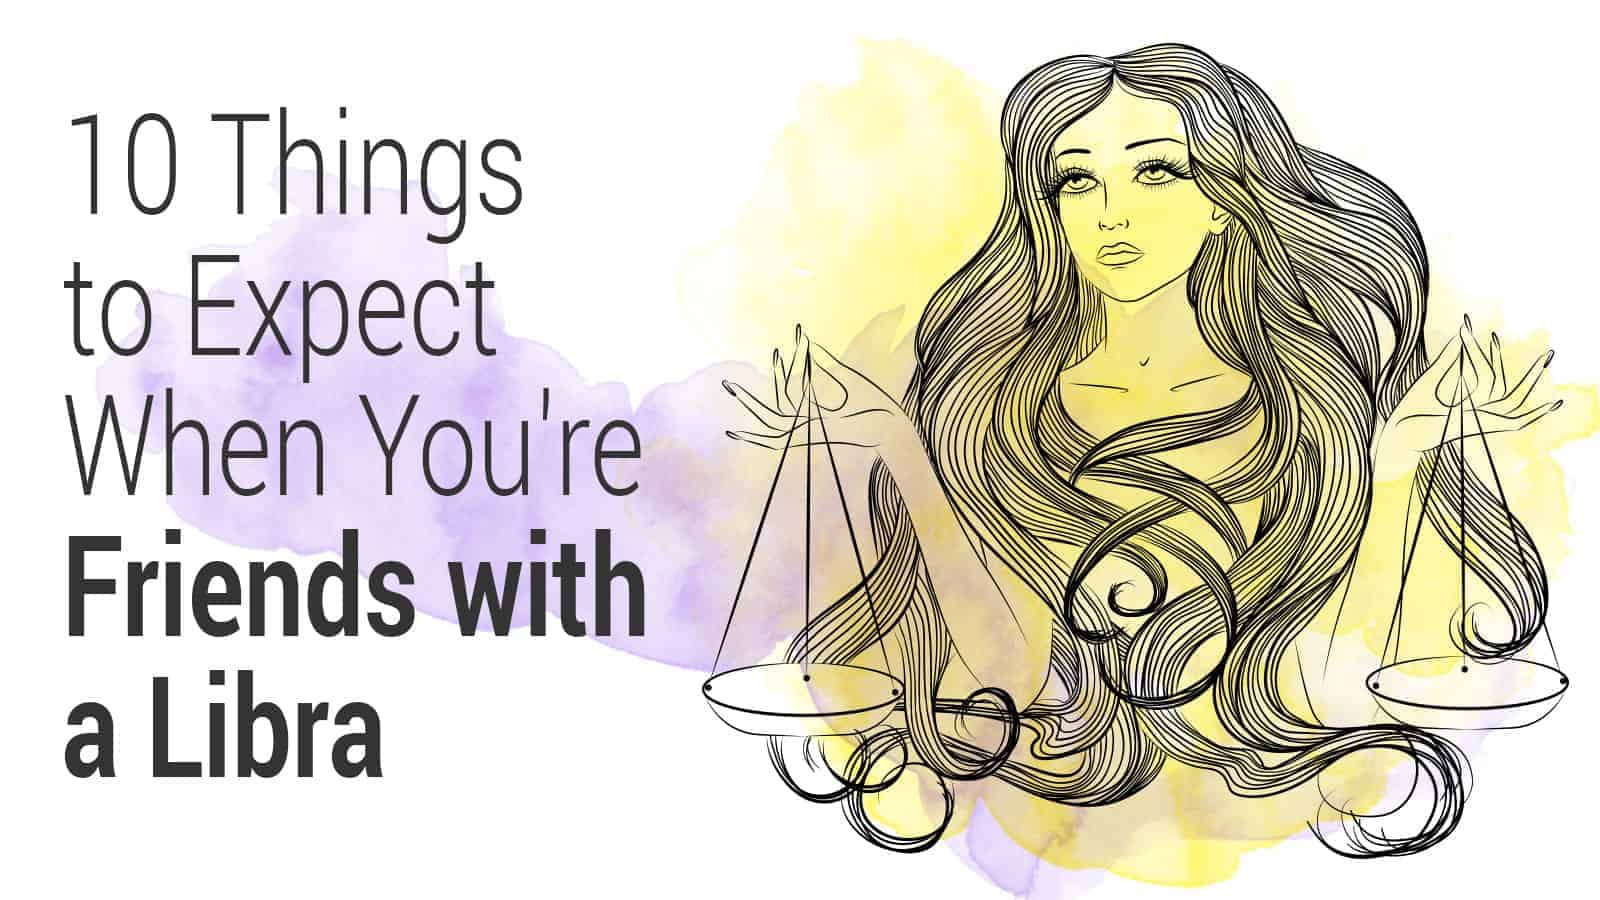 10 Things to Expect When You’re Friends with a Libra